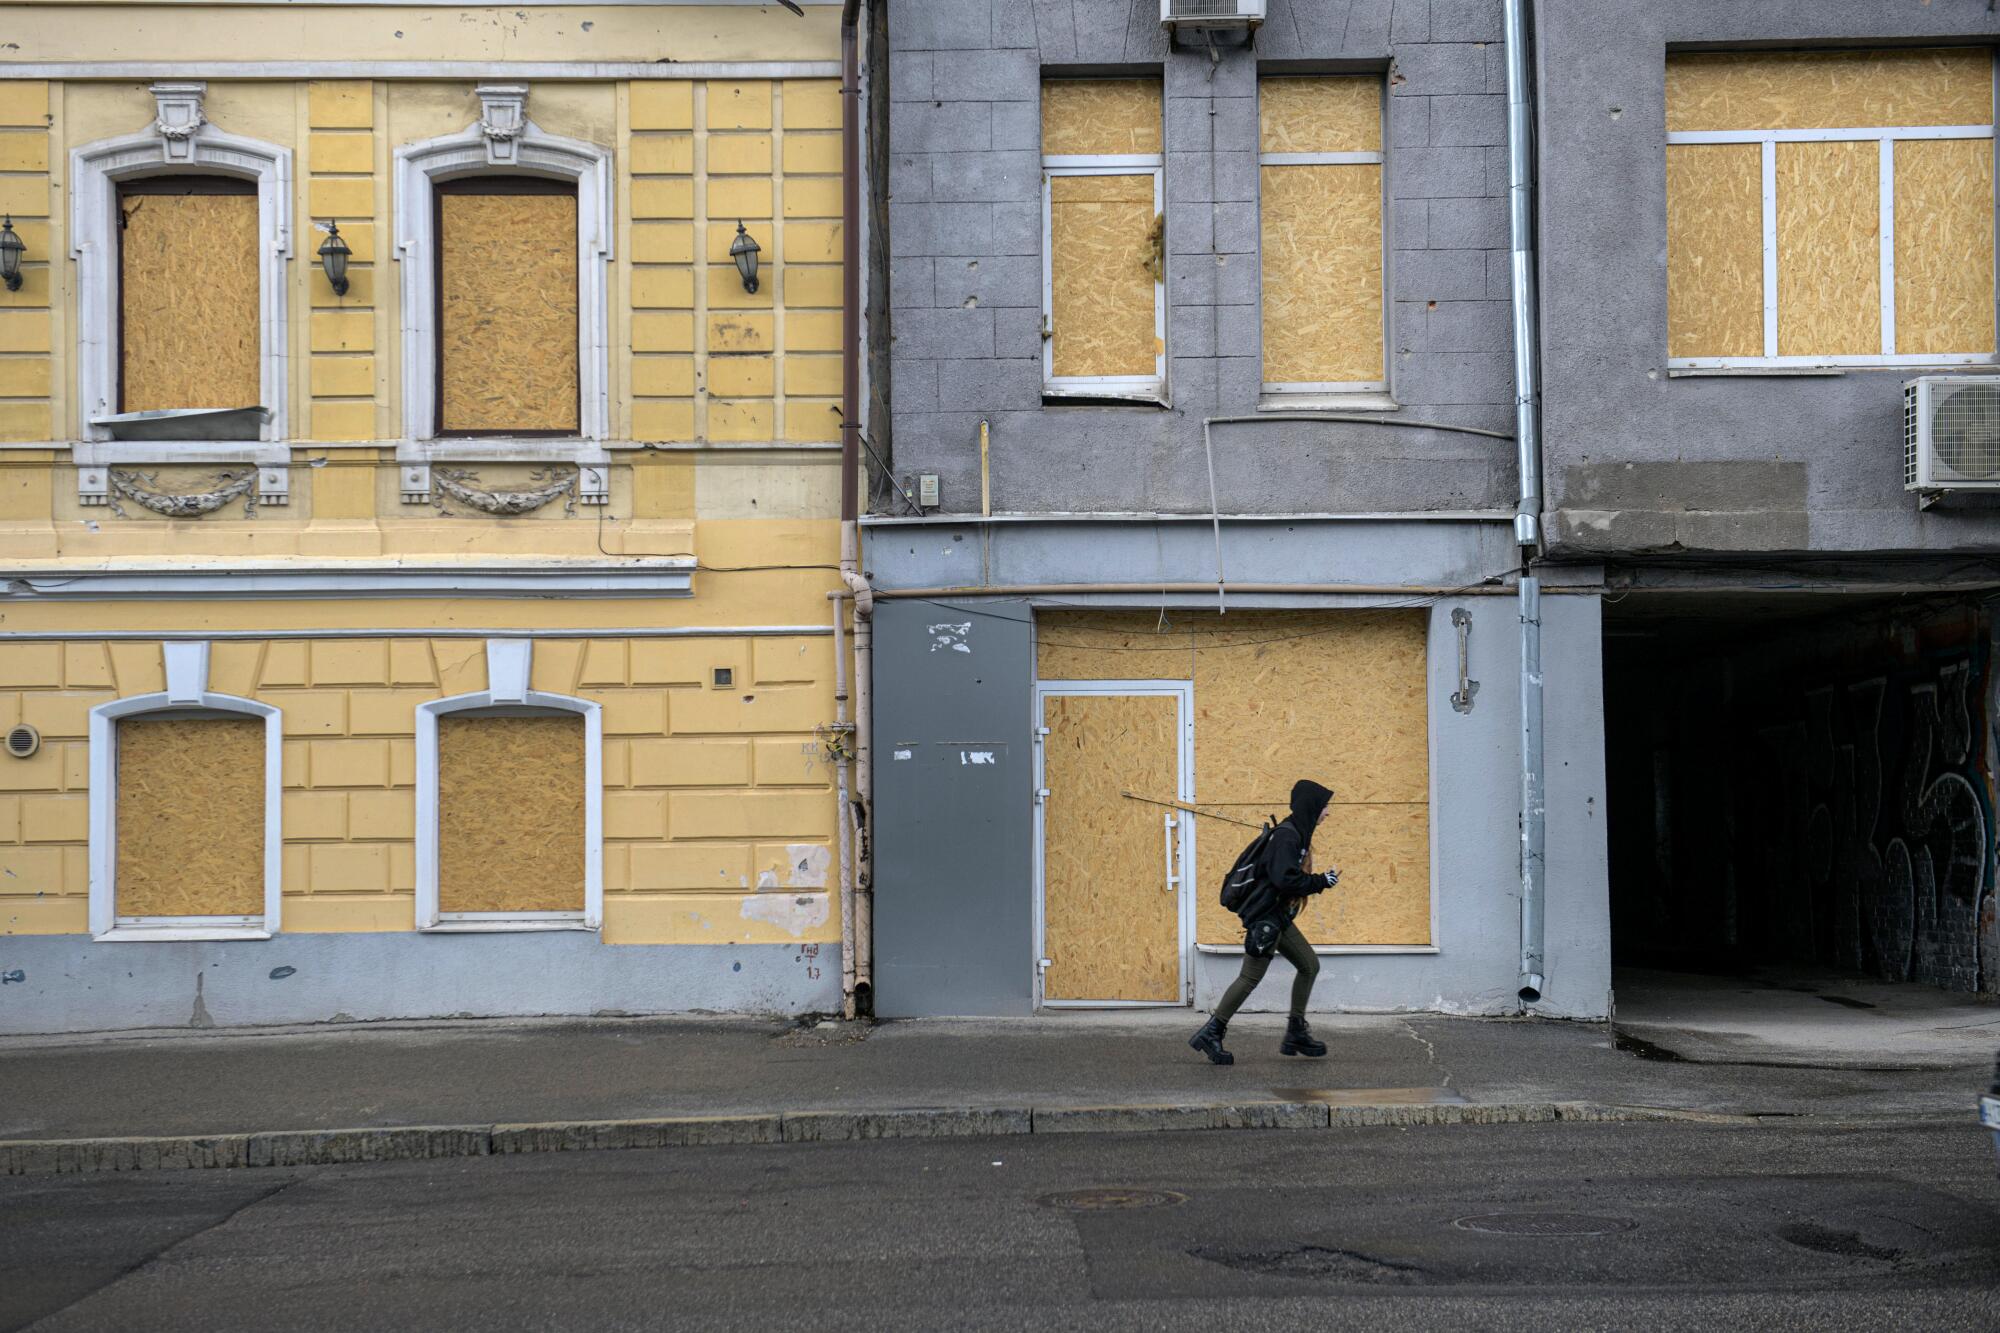 A person passes buildings with boarded-up windows and doors.